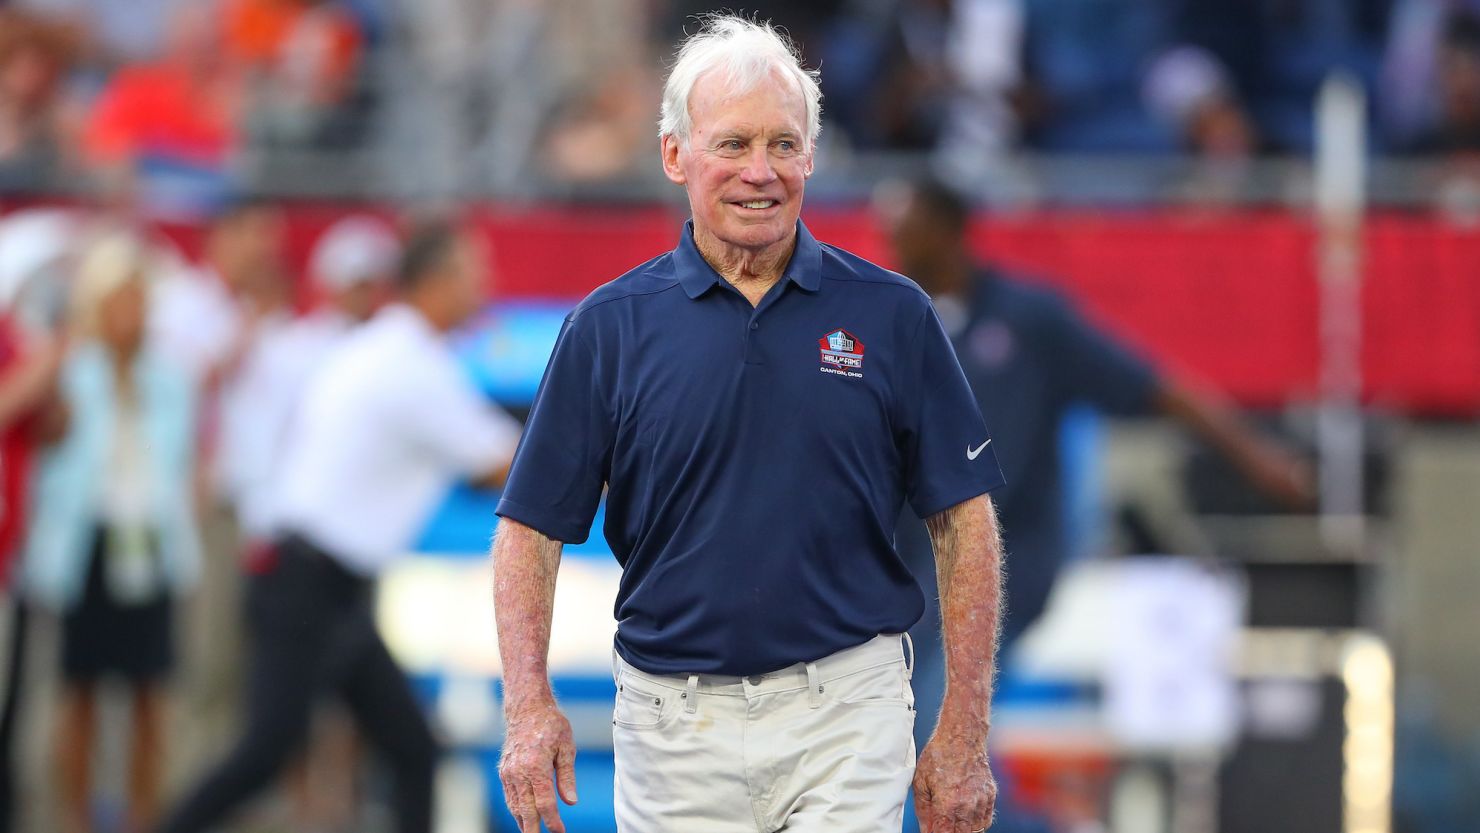 Former NFL general manager Bobby Beathard, seen here in 2018, died this week at the age of 86.